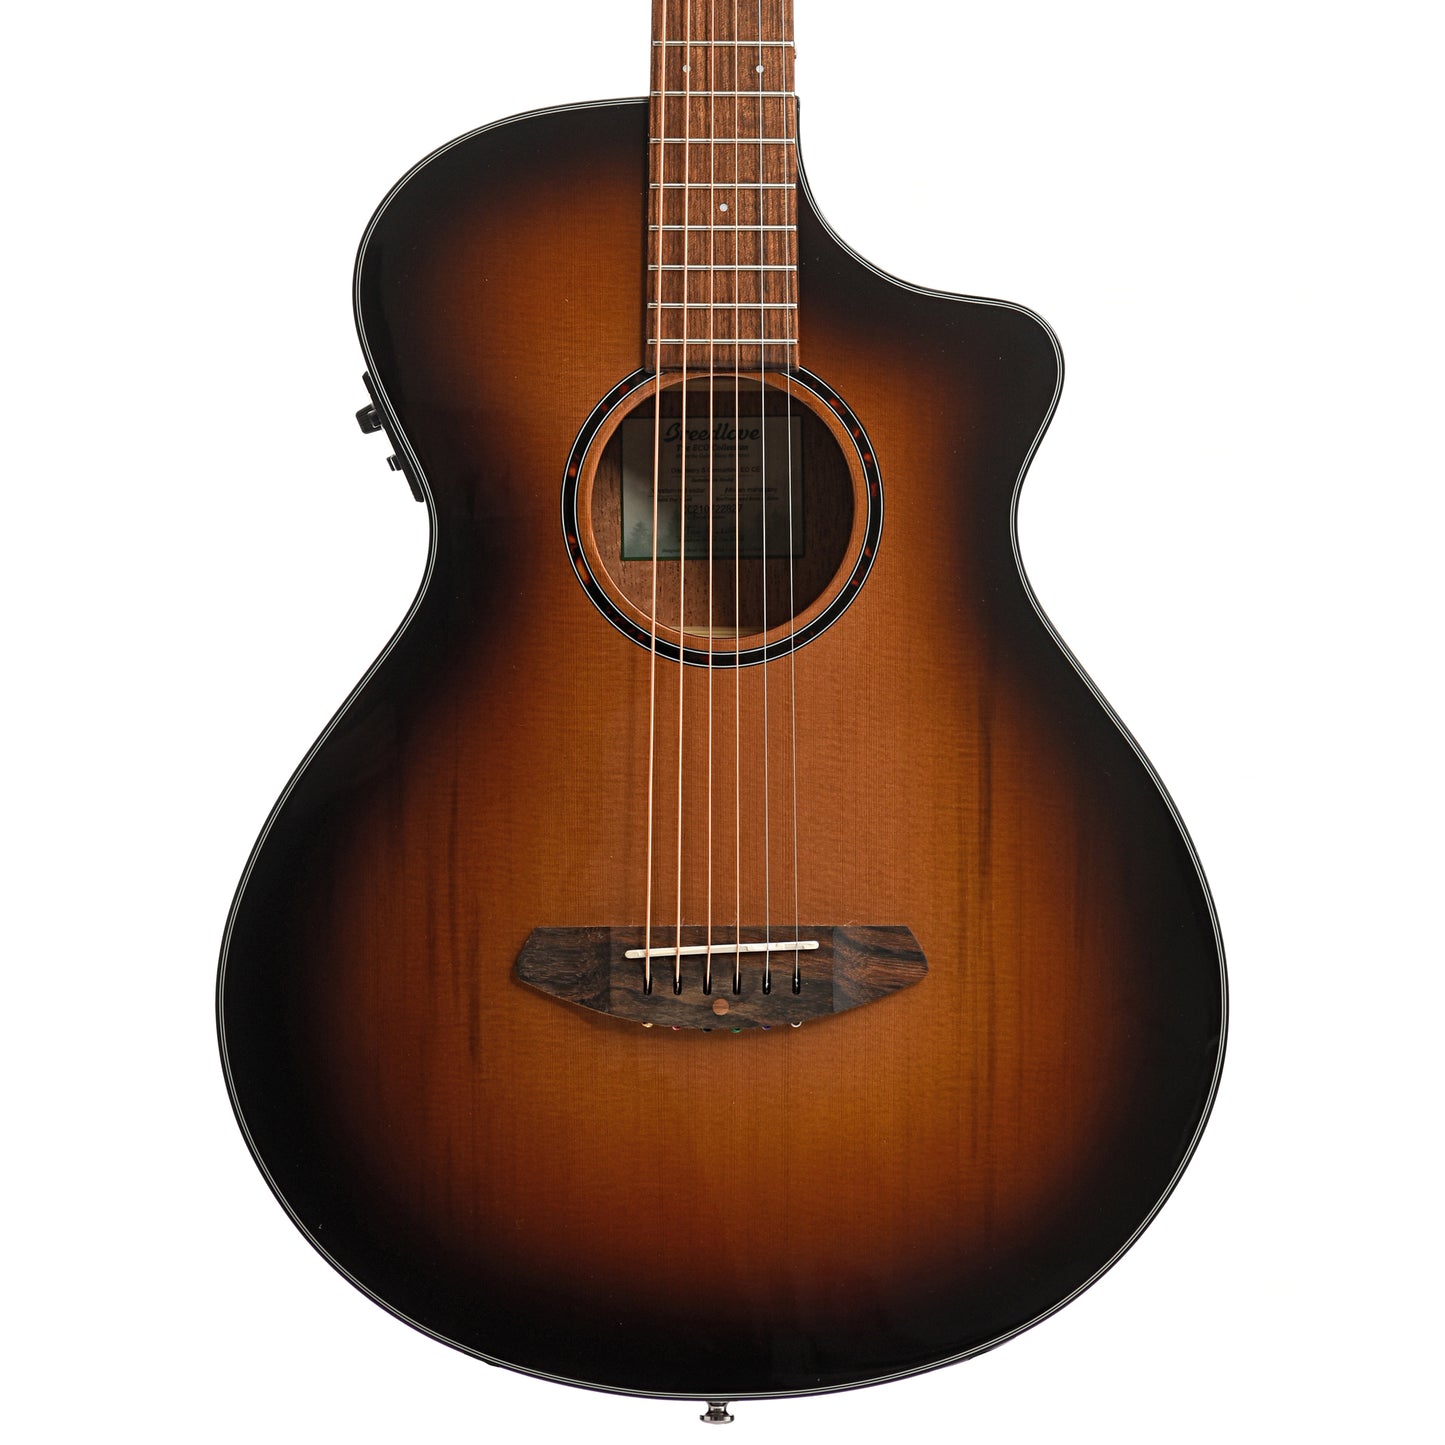 Image 1 of Breedlove Eco Collection Discovery S Concertina Edgeburst CE Red Cedar-African Mahogany Acoustic-Electric Guitar- SKU# DSCA44CERCAM : Product Type Flat-top Guitars : Elderly Instruments